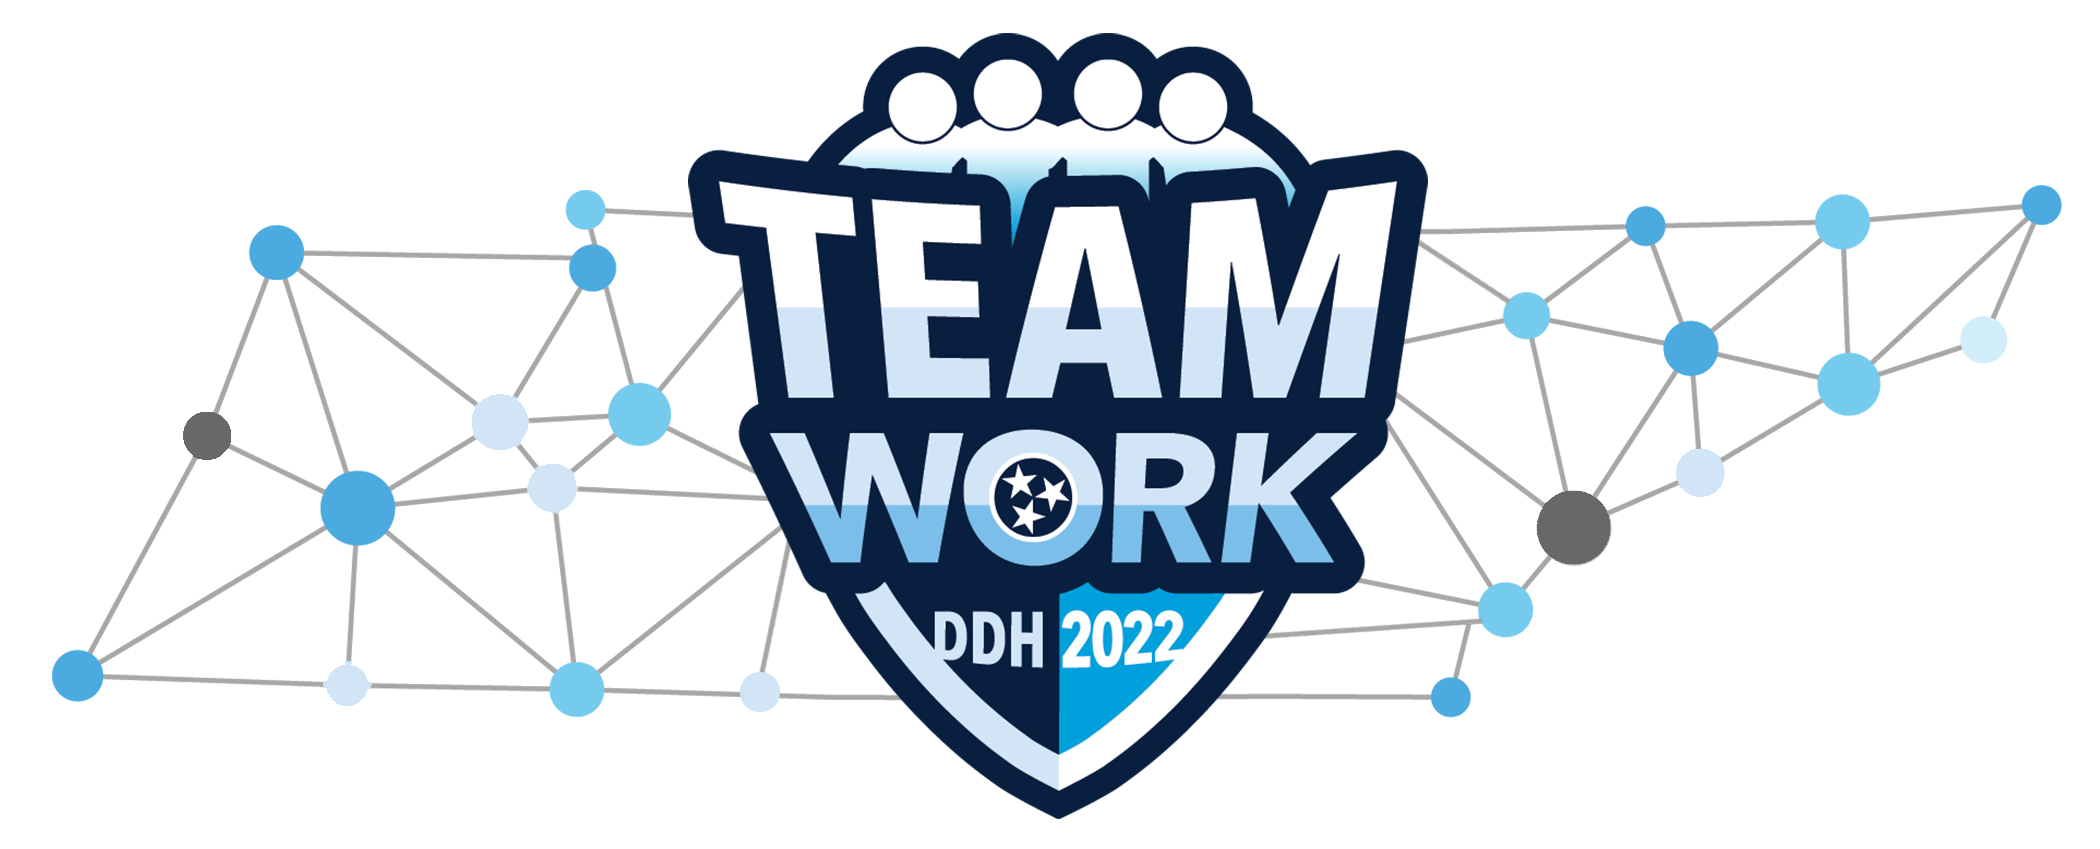 DDH 2022 logo with an outline of Tennessee behind it